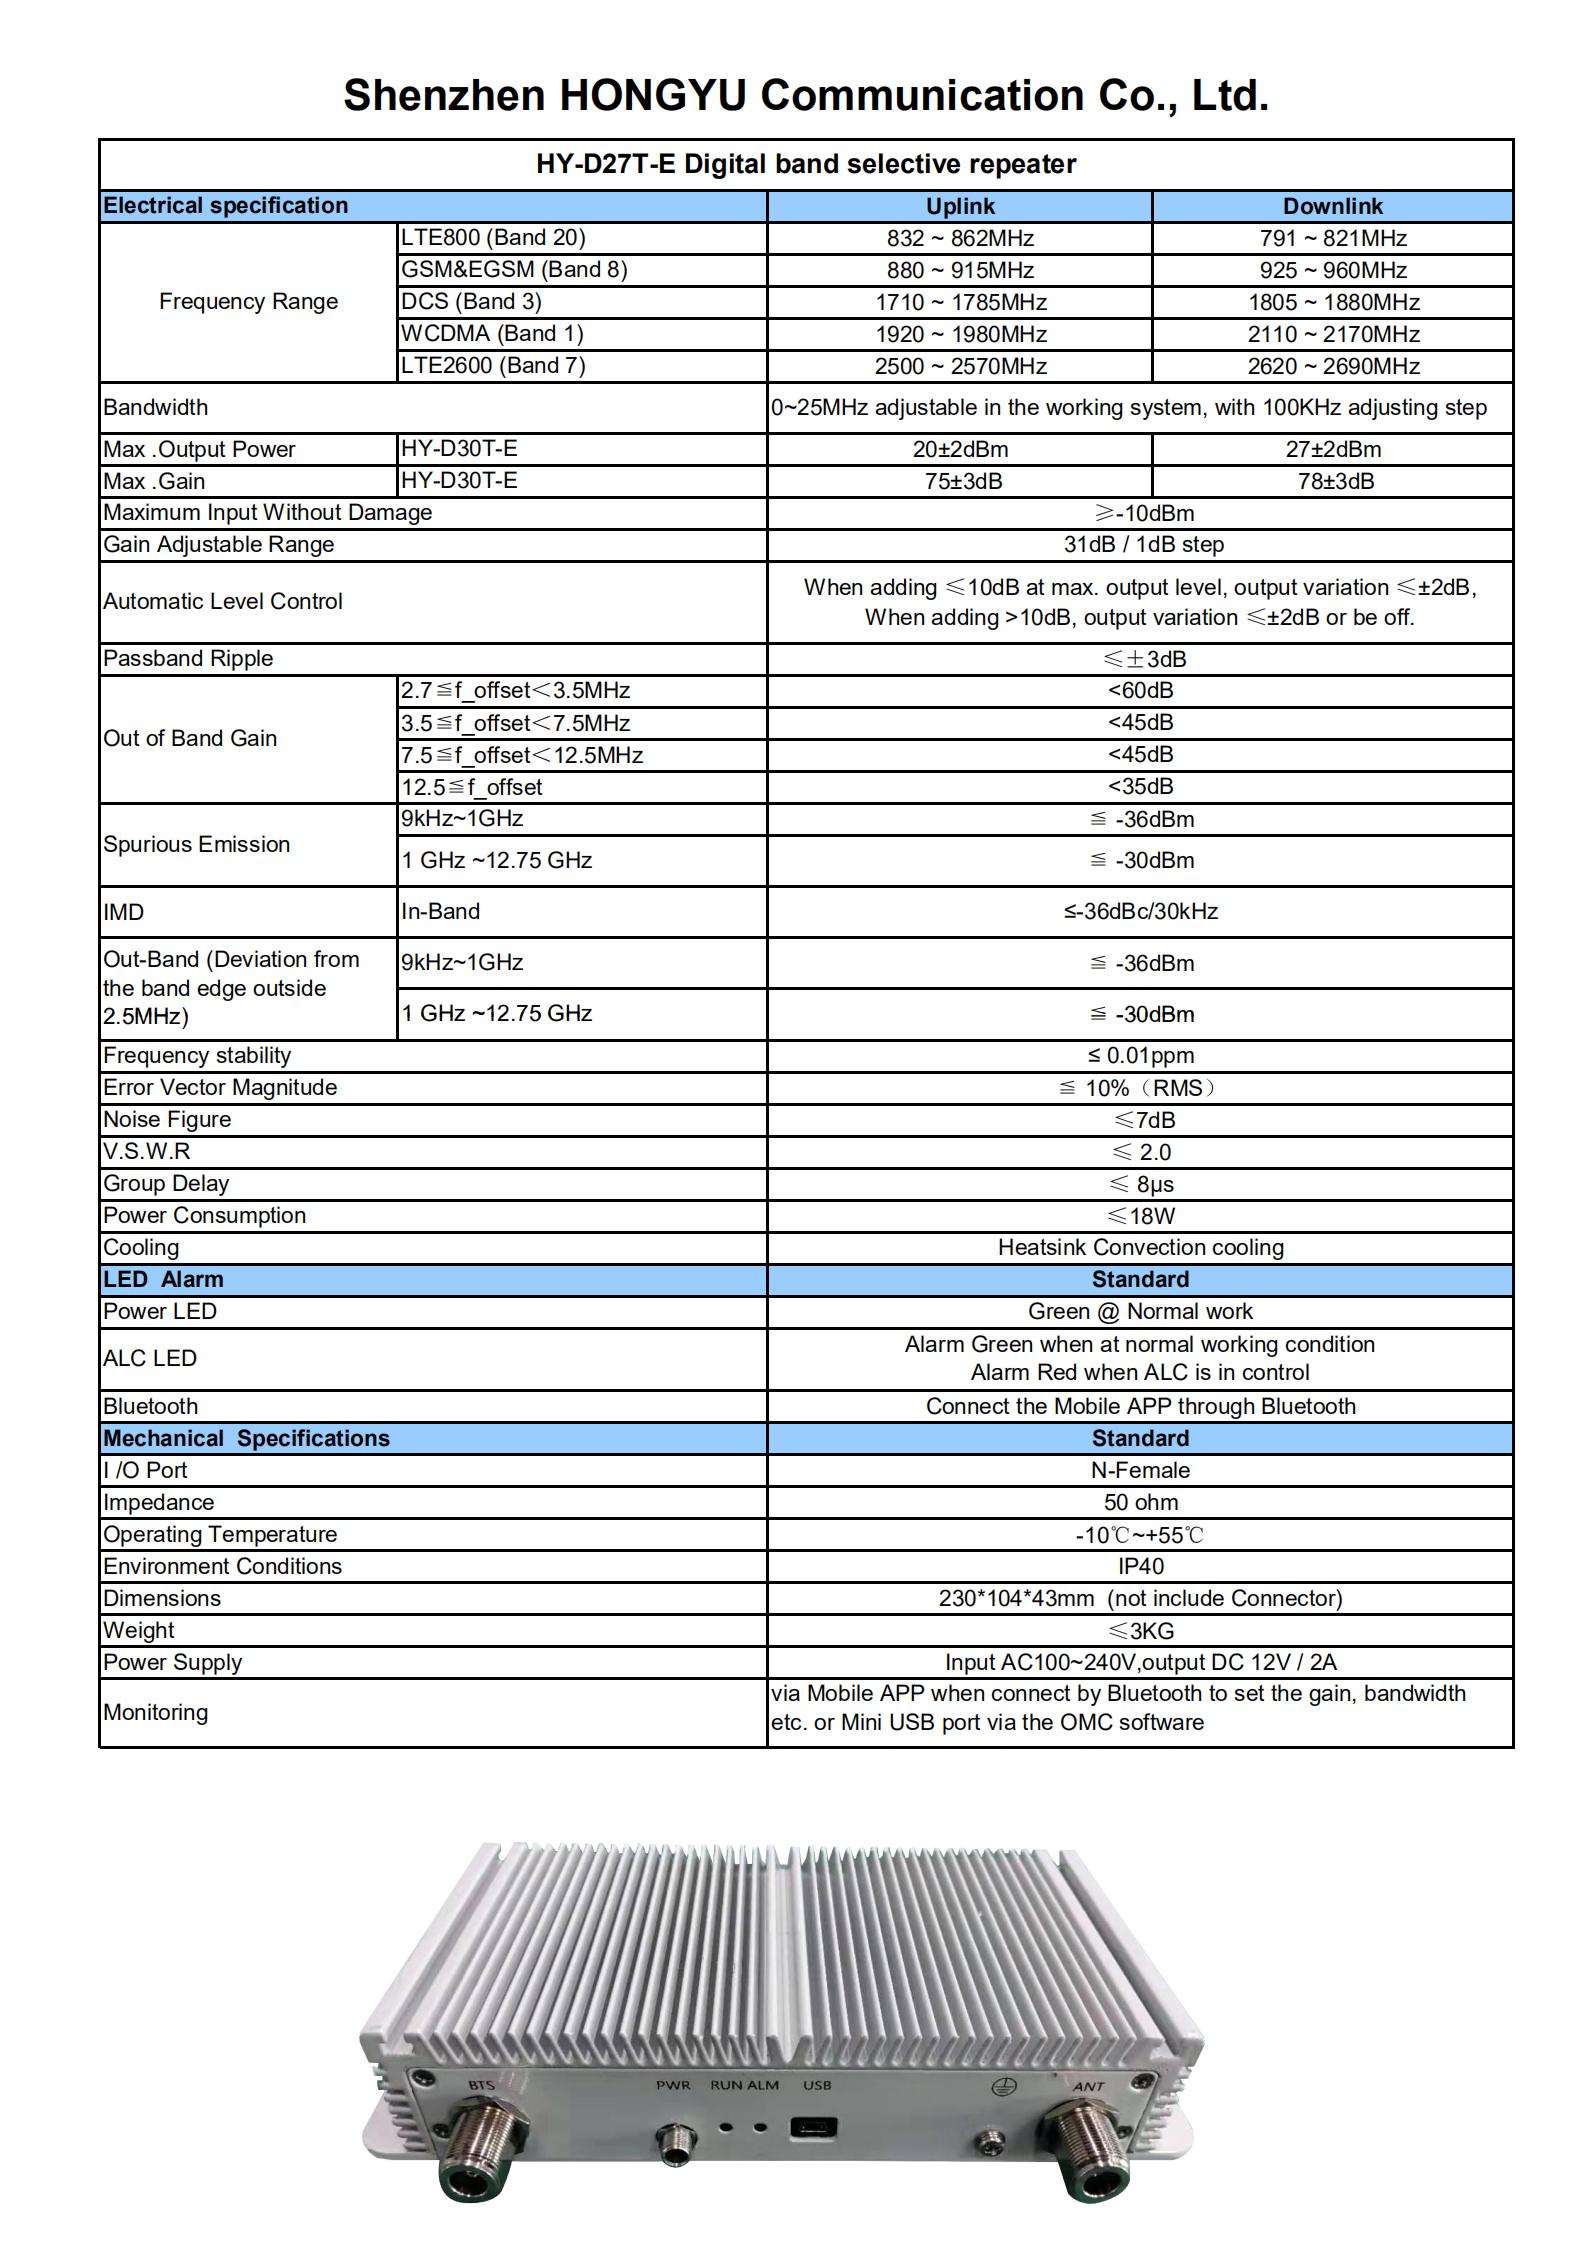 HY-D27T-E Digital Repeater Specifications_00.jpg